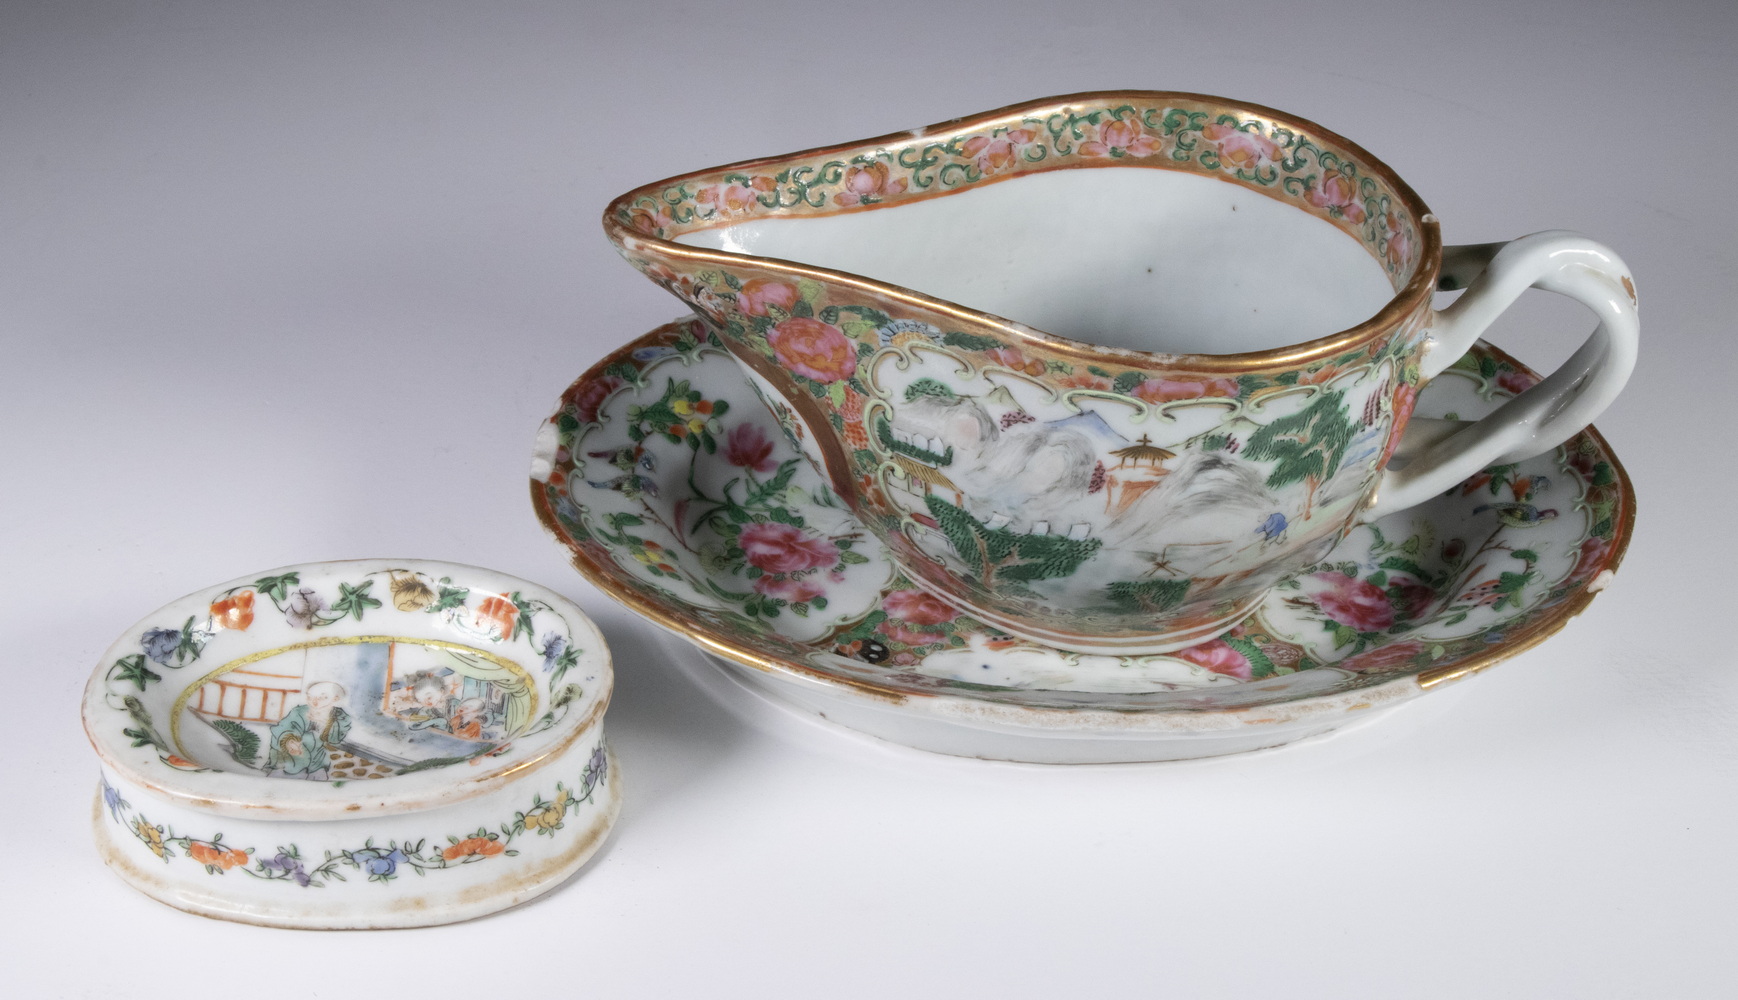 CHINESE EXPORT PORCELAIN SERVING 30256b